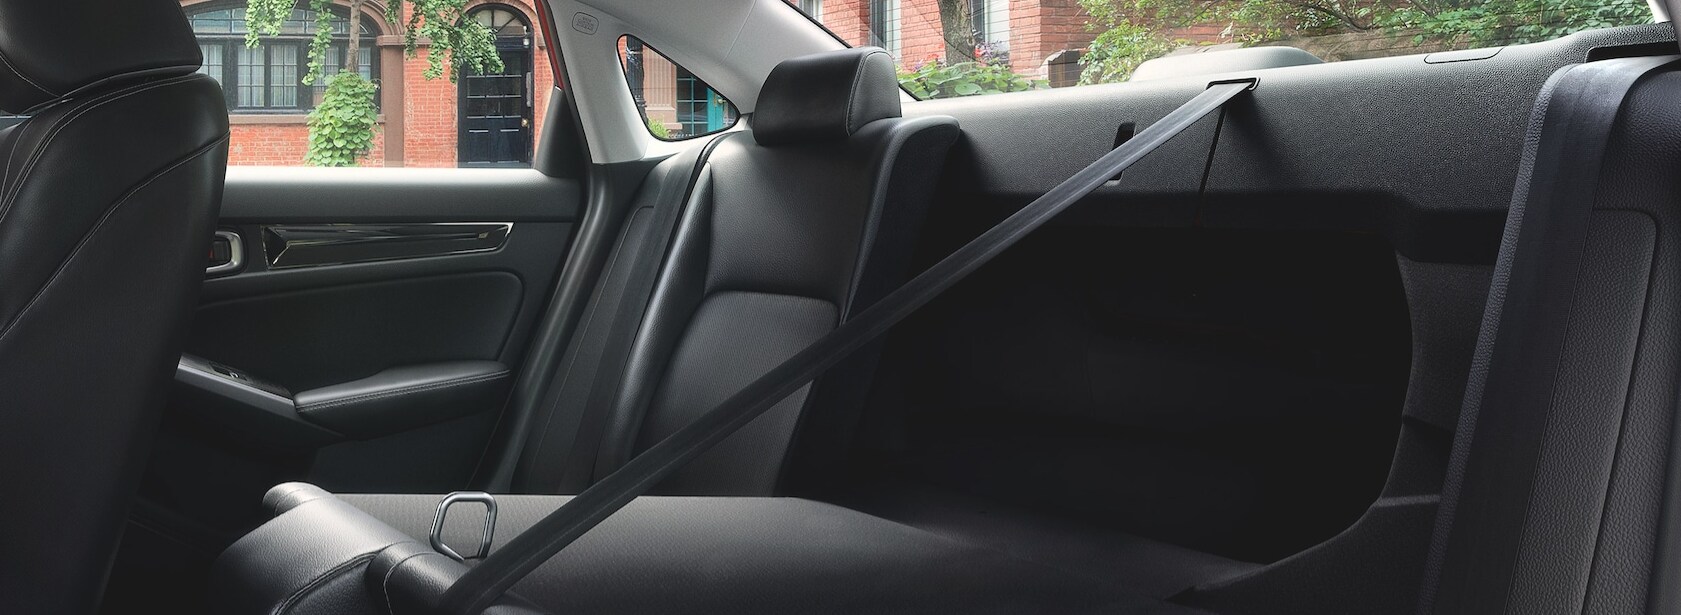 A view of the rear split-back seat with one seatback pulled forward allowing access to the trunk of the 2022 Honda Civic